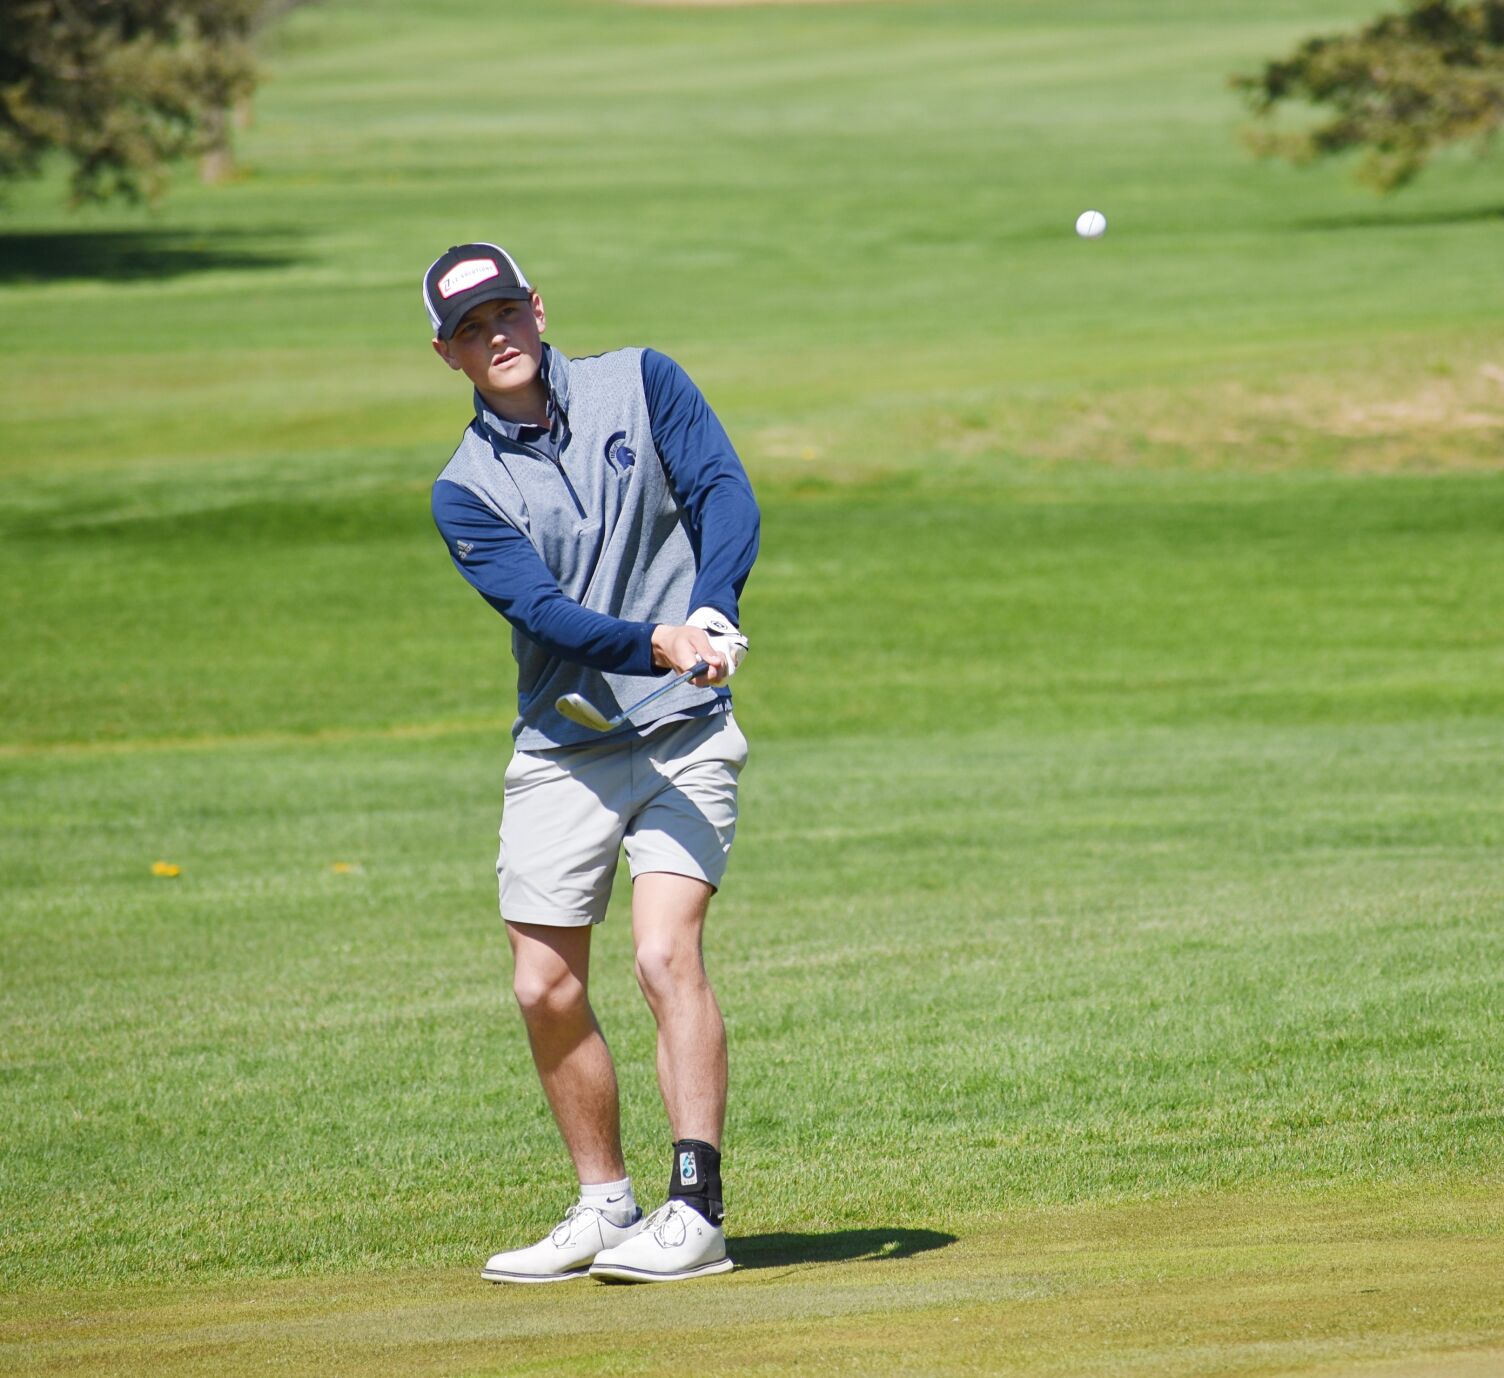 McFarland boys golf ties for second at conference mini meet, fifth at Evansville Invite